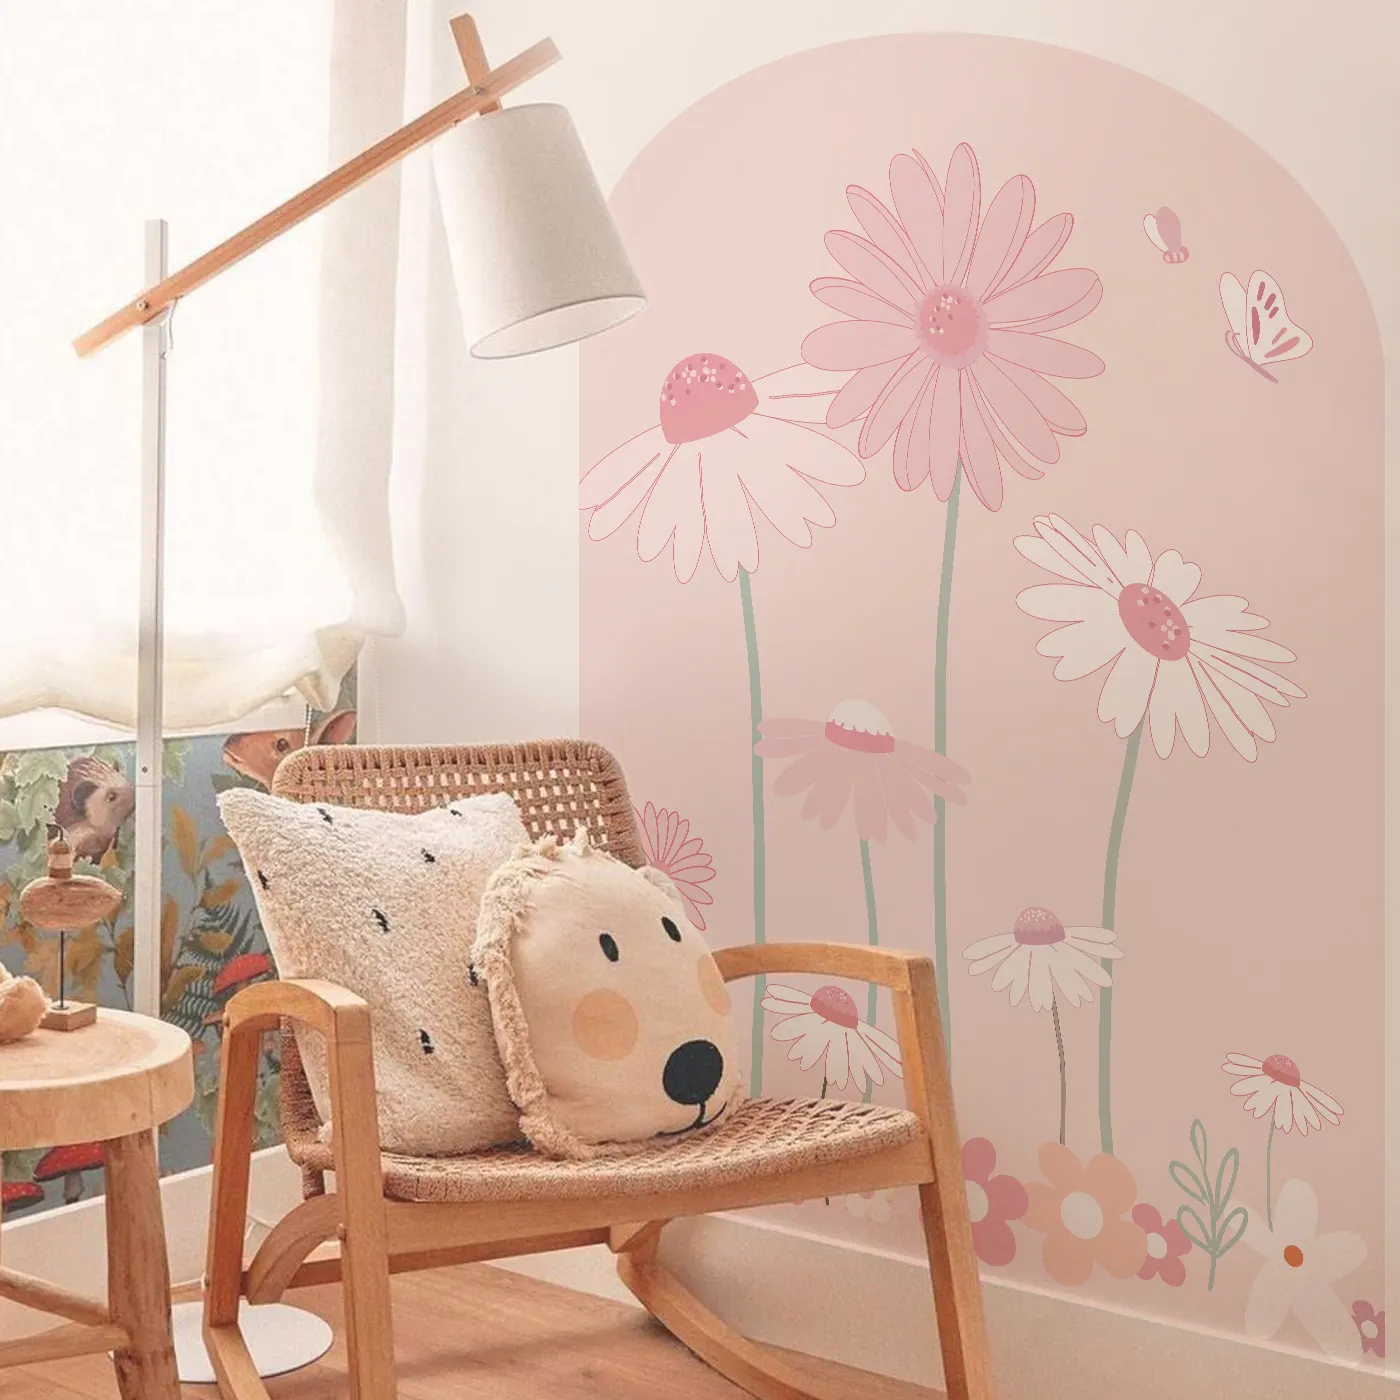 Funlife Arch Flower Wall Decals Wild Daisy Floral Girls' Wall Decor Removable Wall Sticker Kids Bedroom Decoration